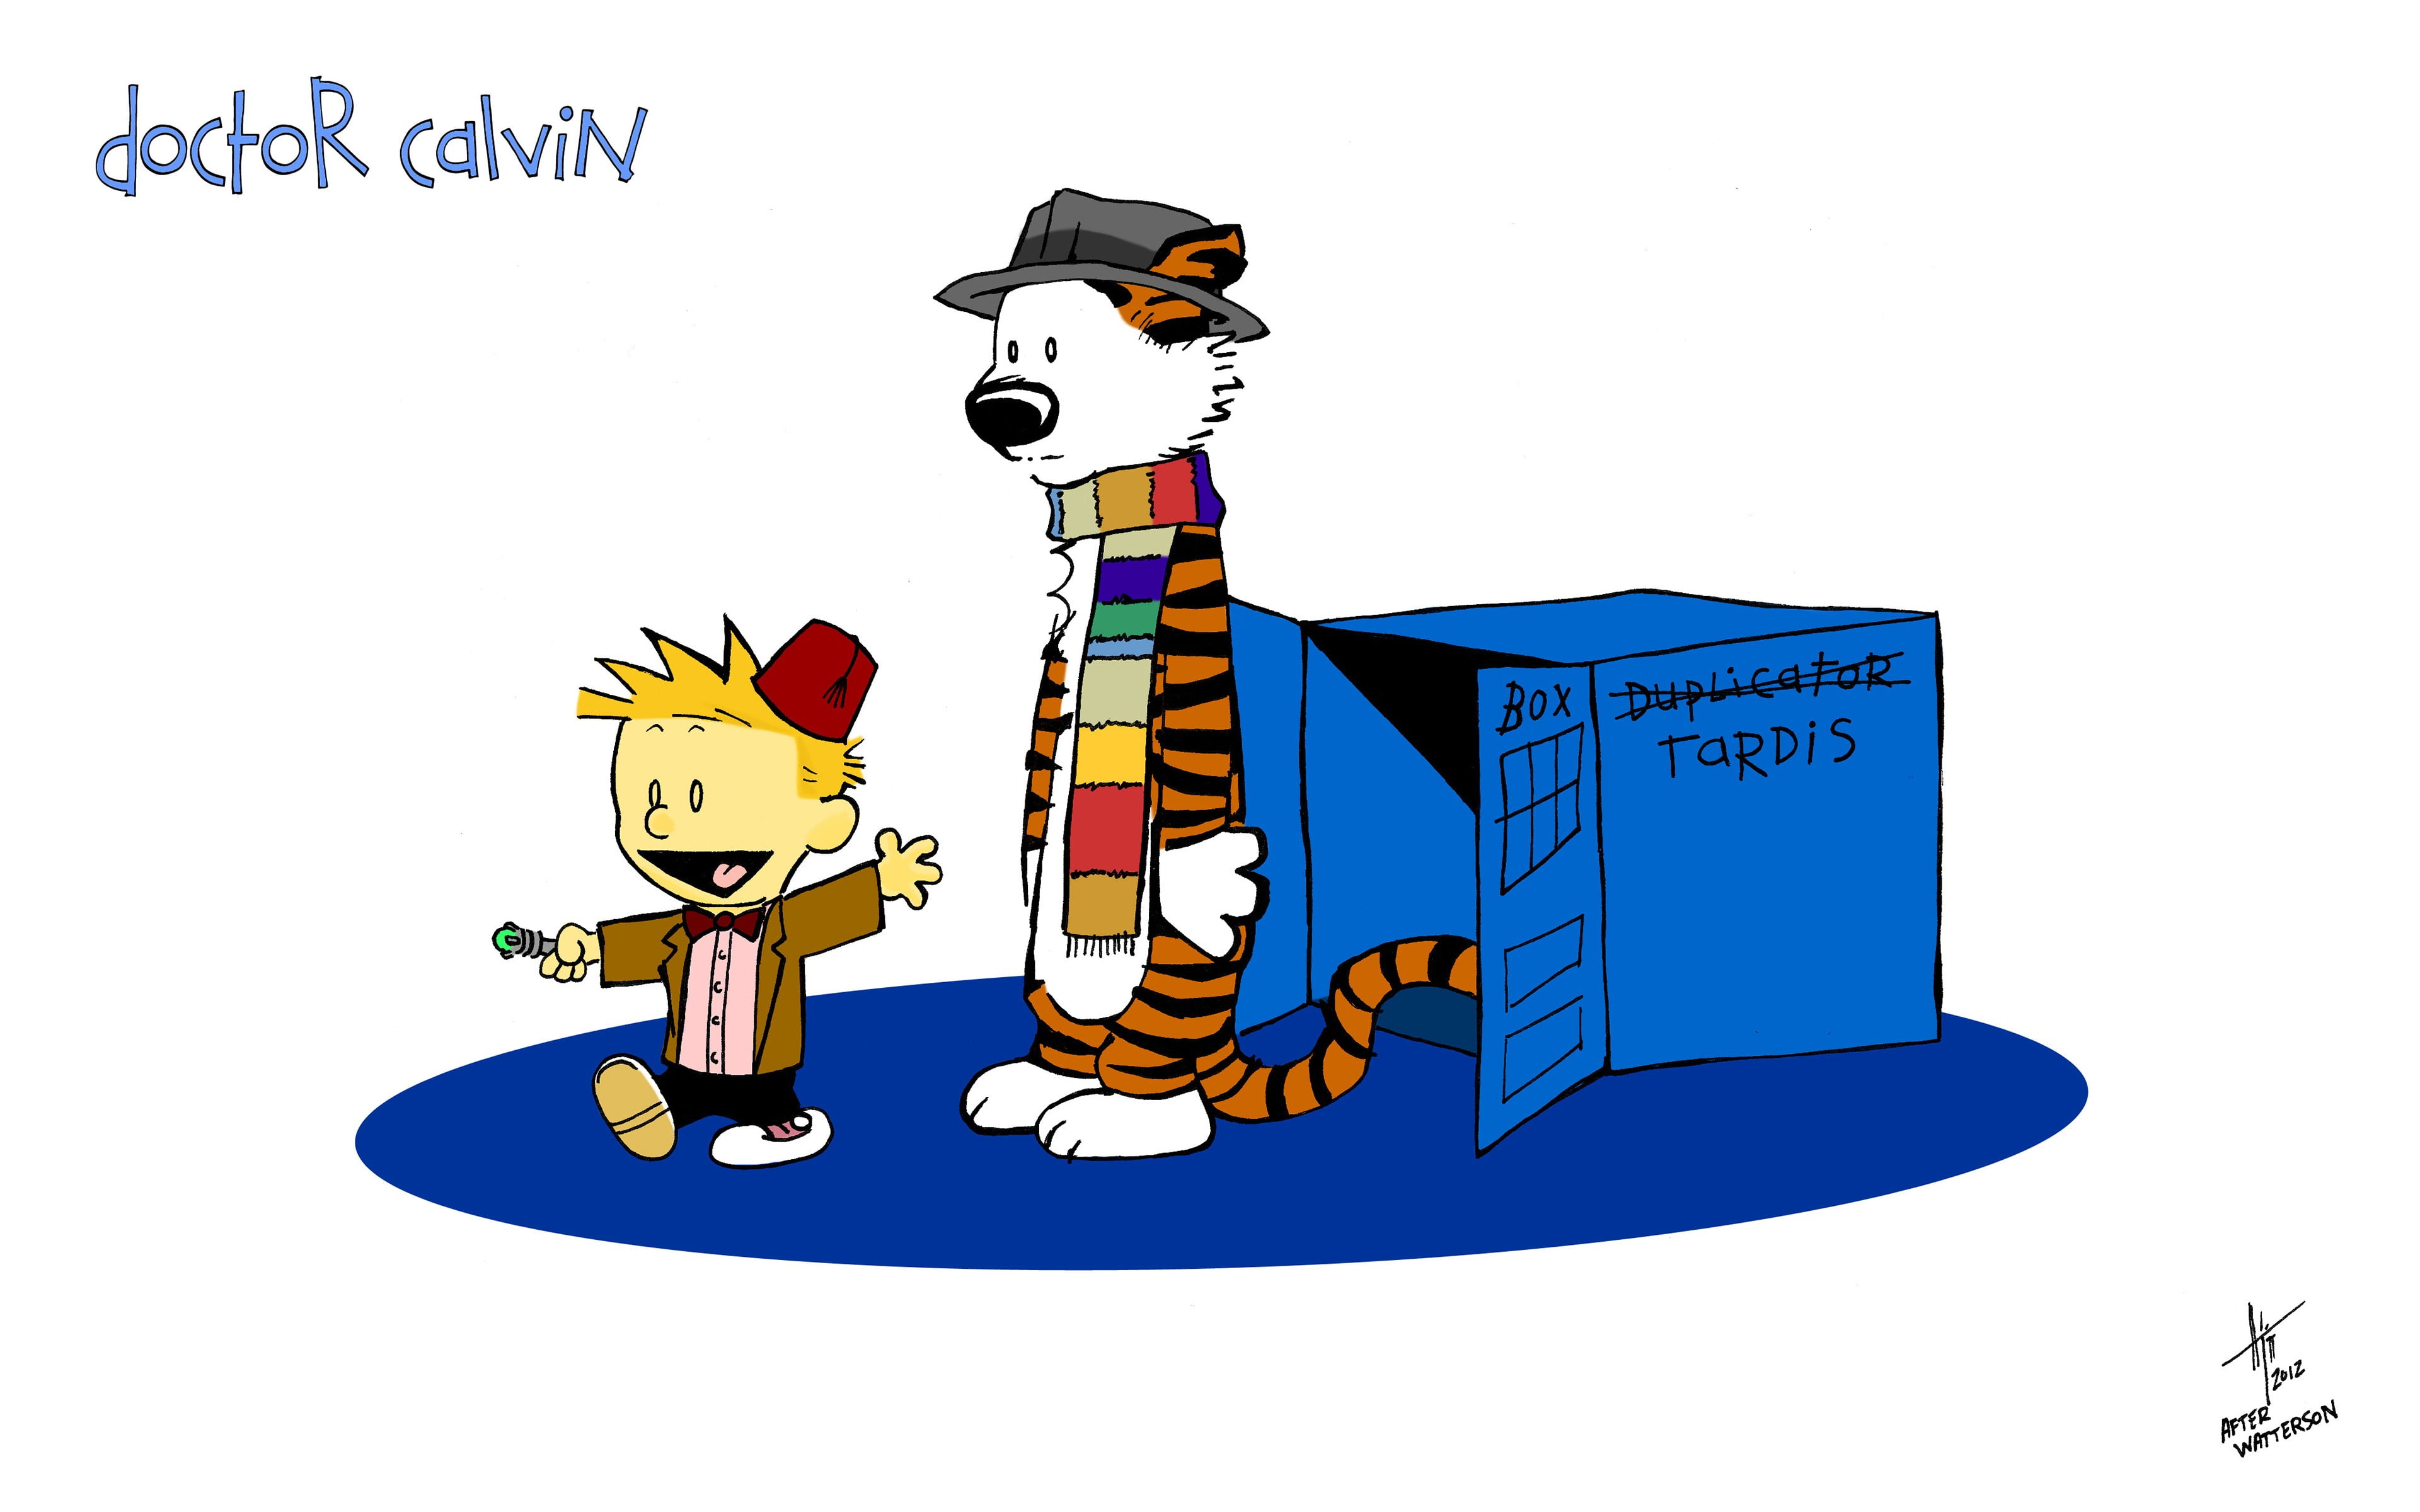 Doctor Calvin illustration, Calvin and Hobbes, comics, Doctor Who